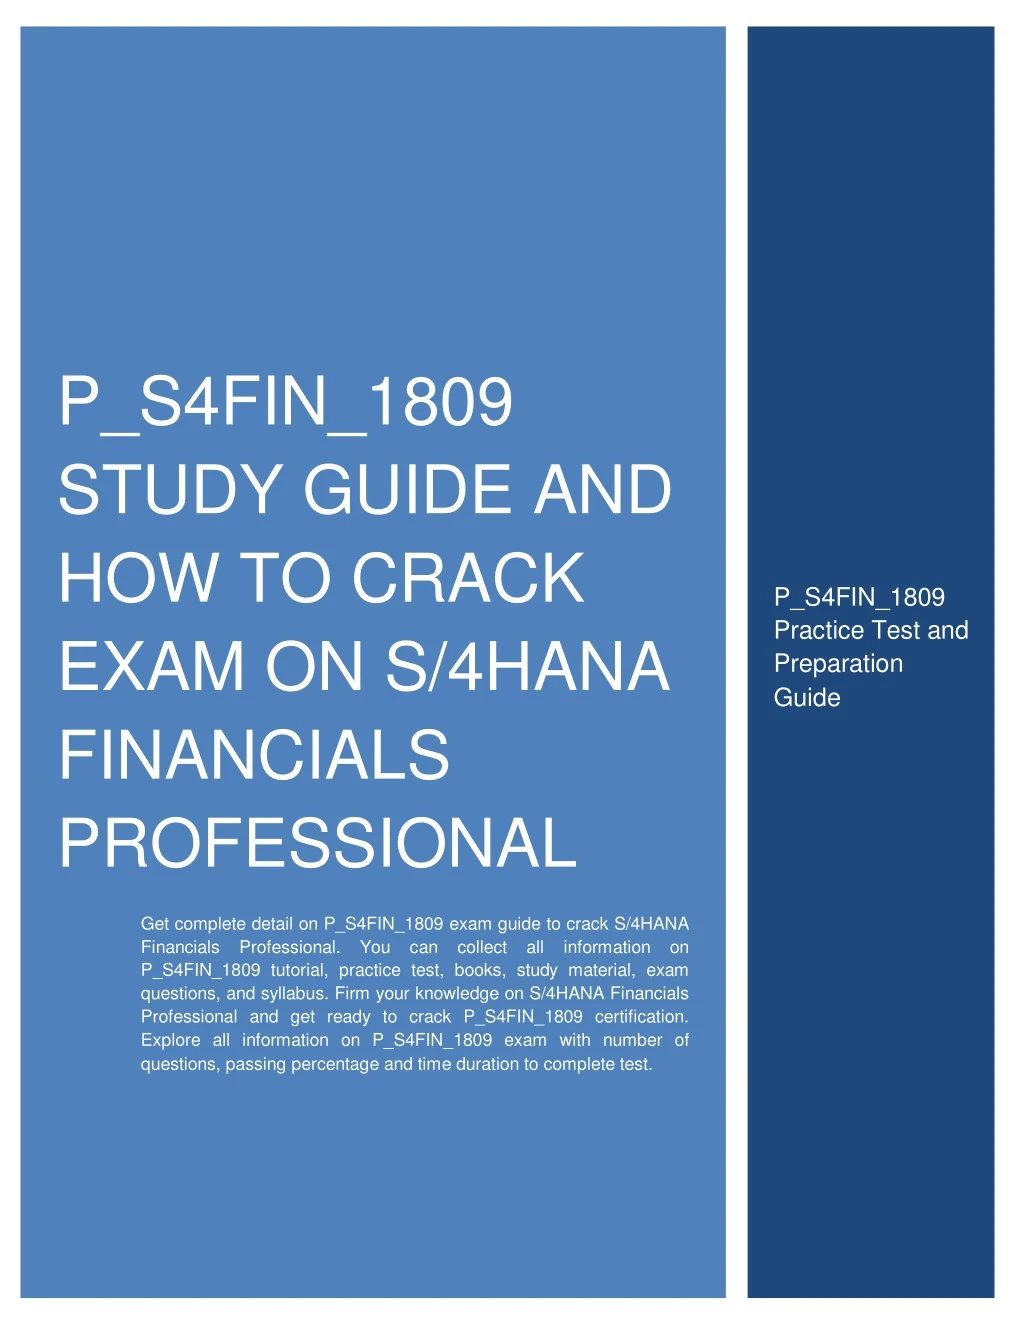 p s4fin 1809 study guide and how to crack exam